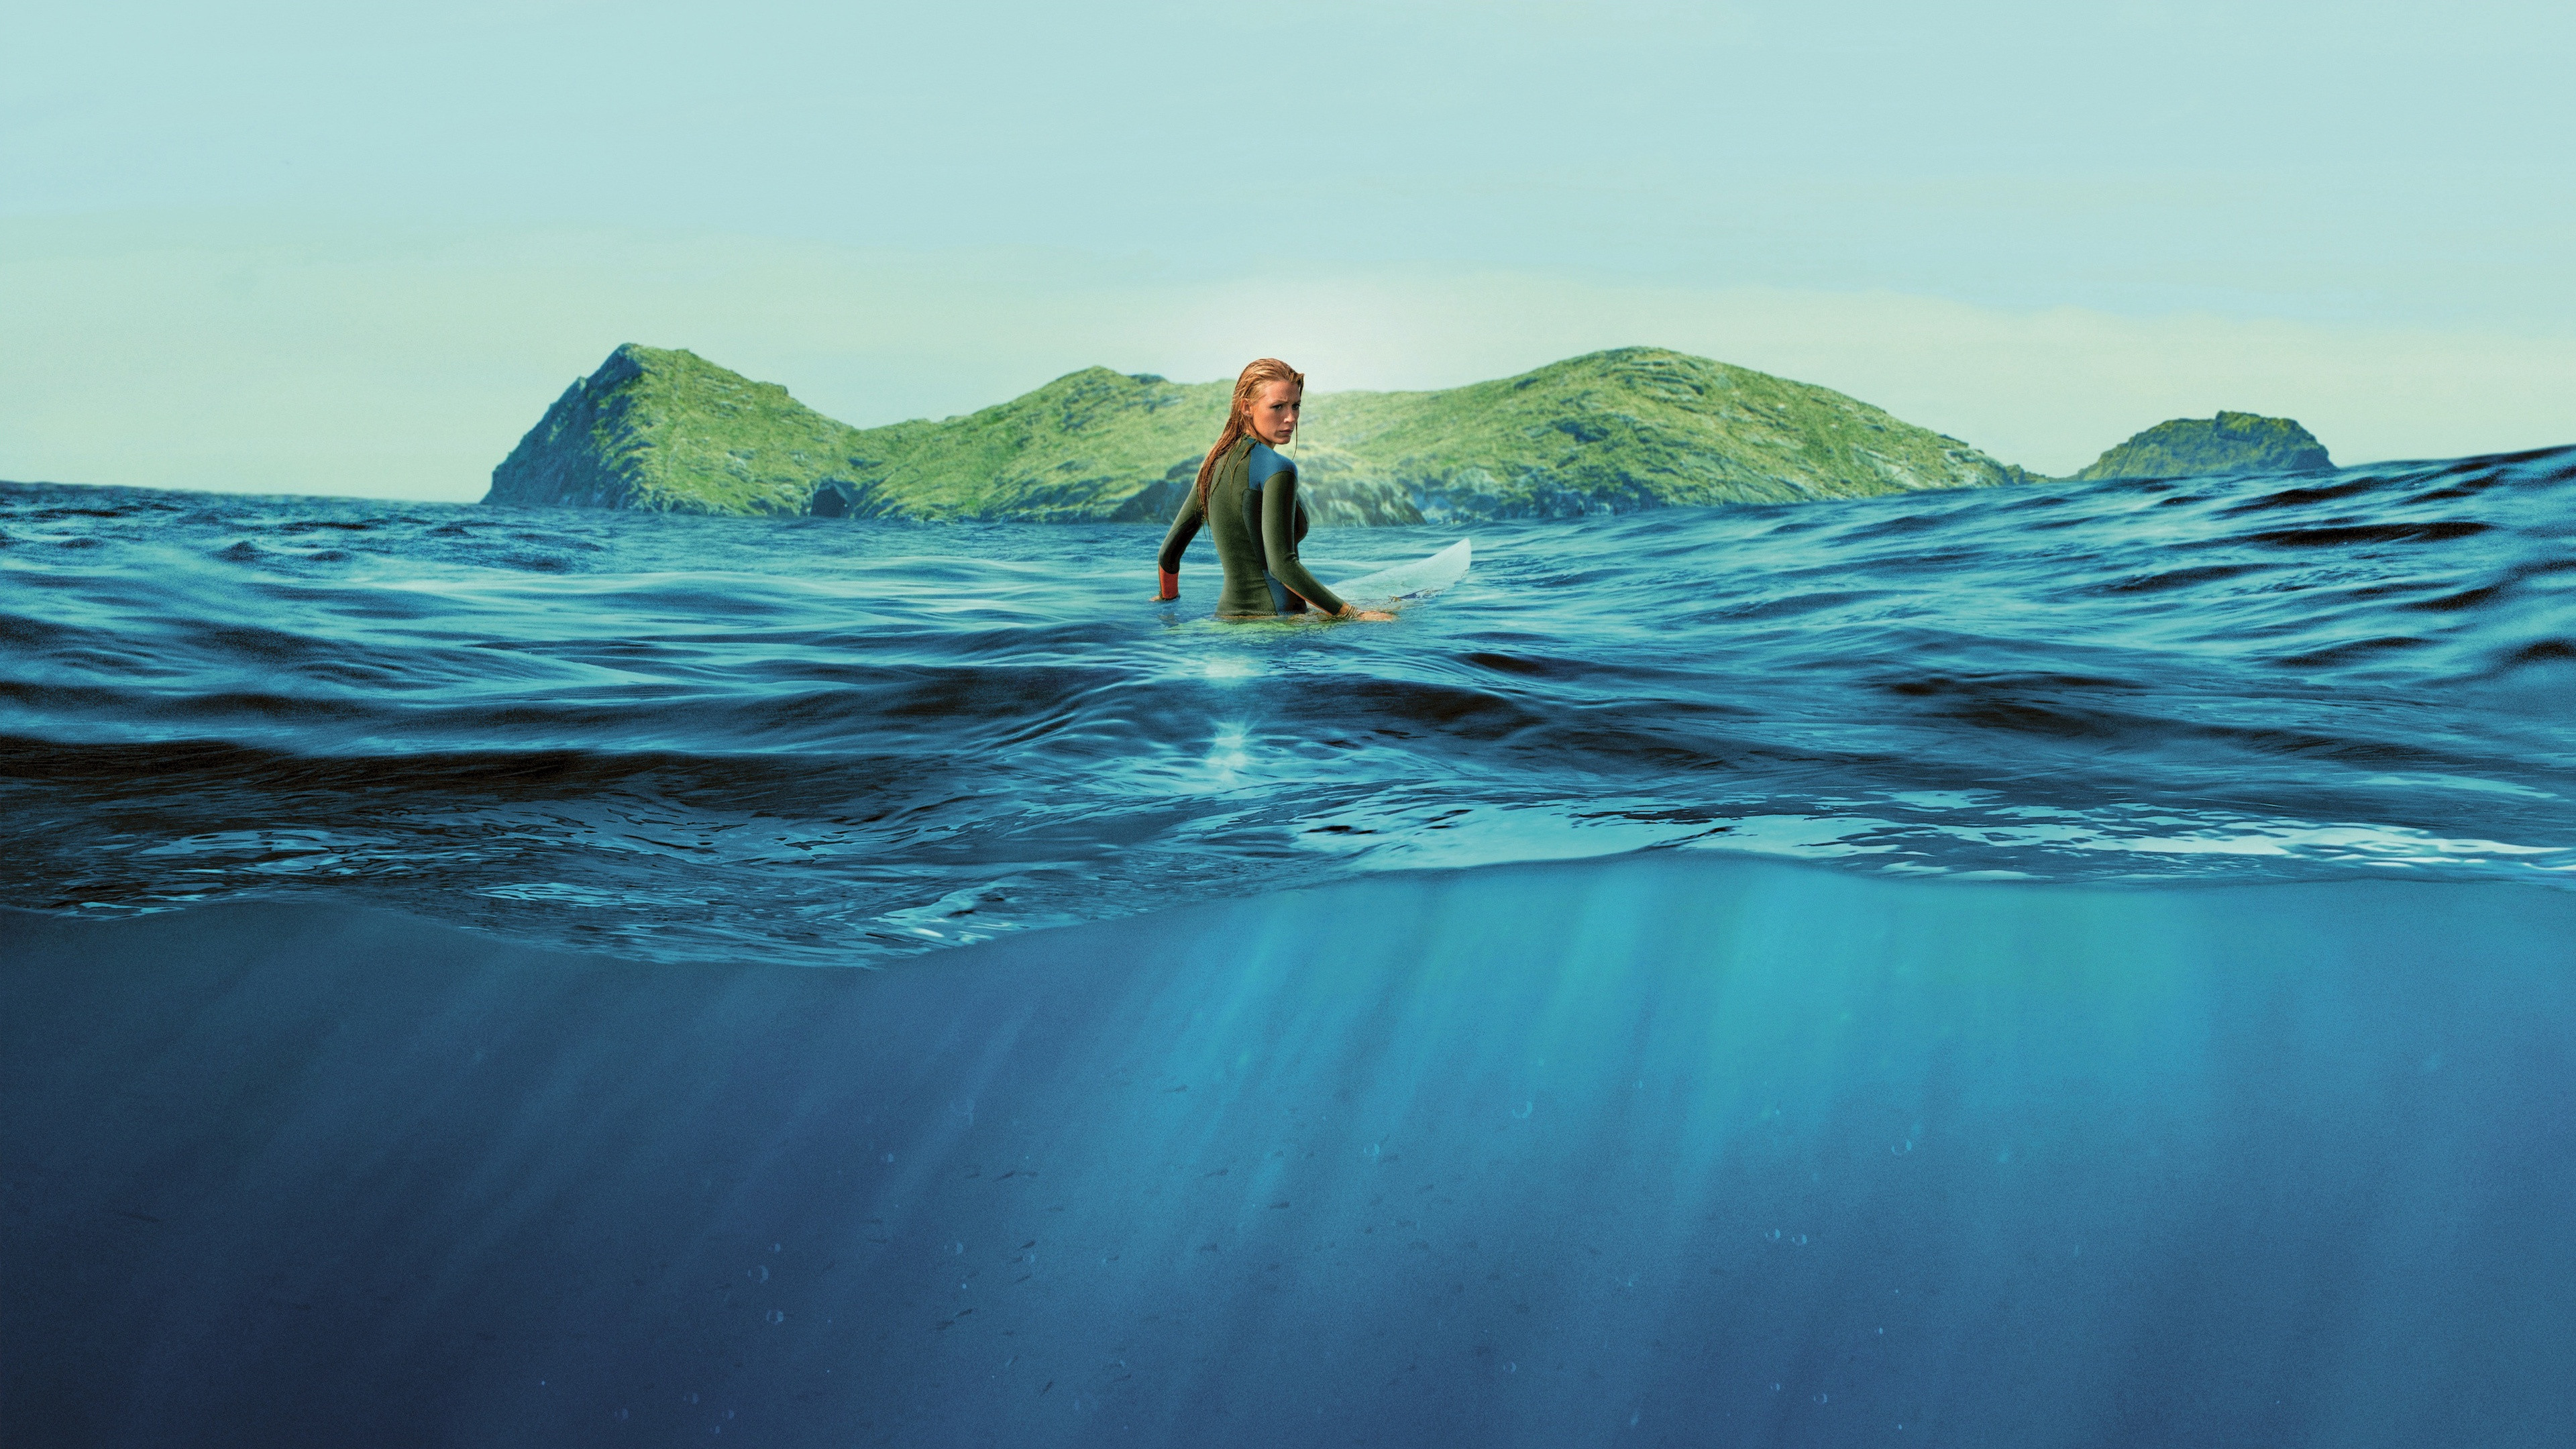 Wallpaper The Shallows, Blake Lively, sea, best movies, Movies #11465